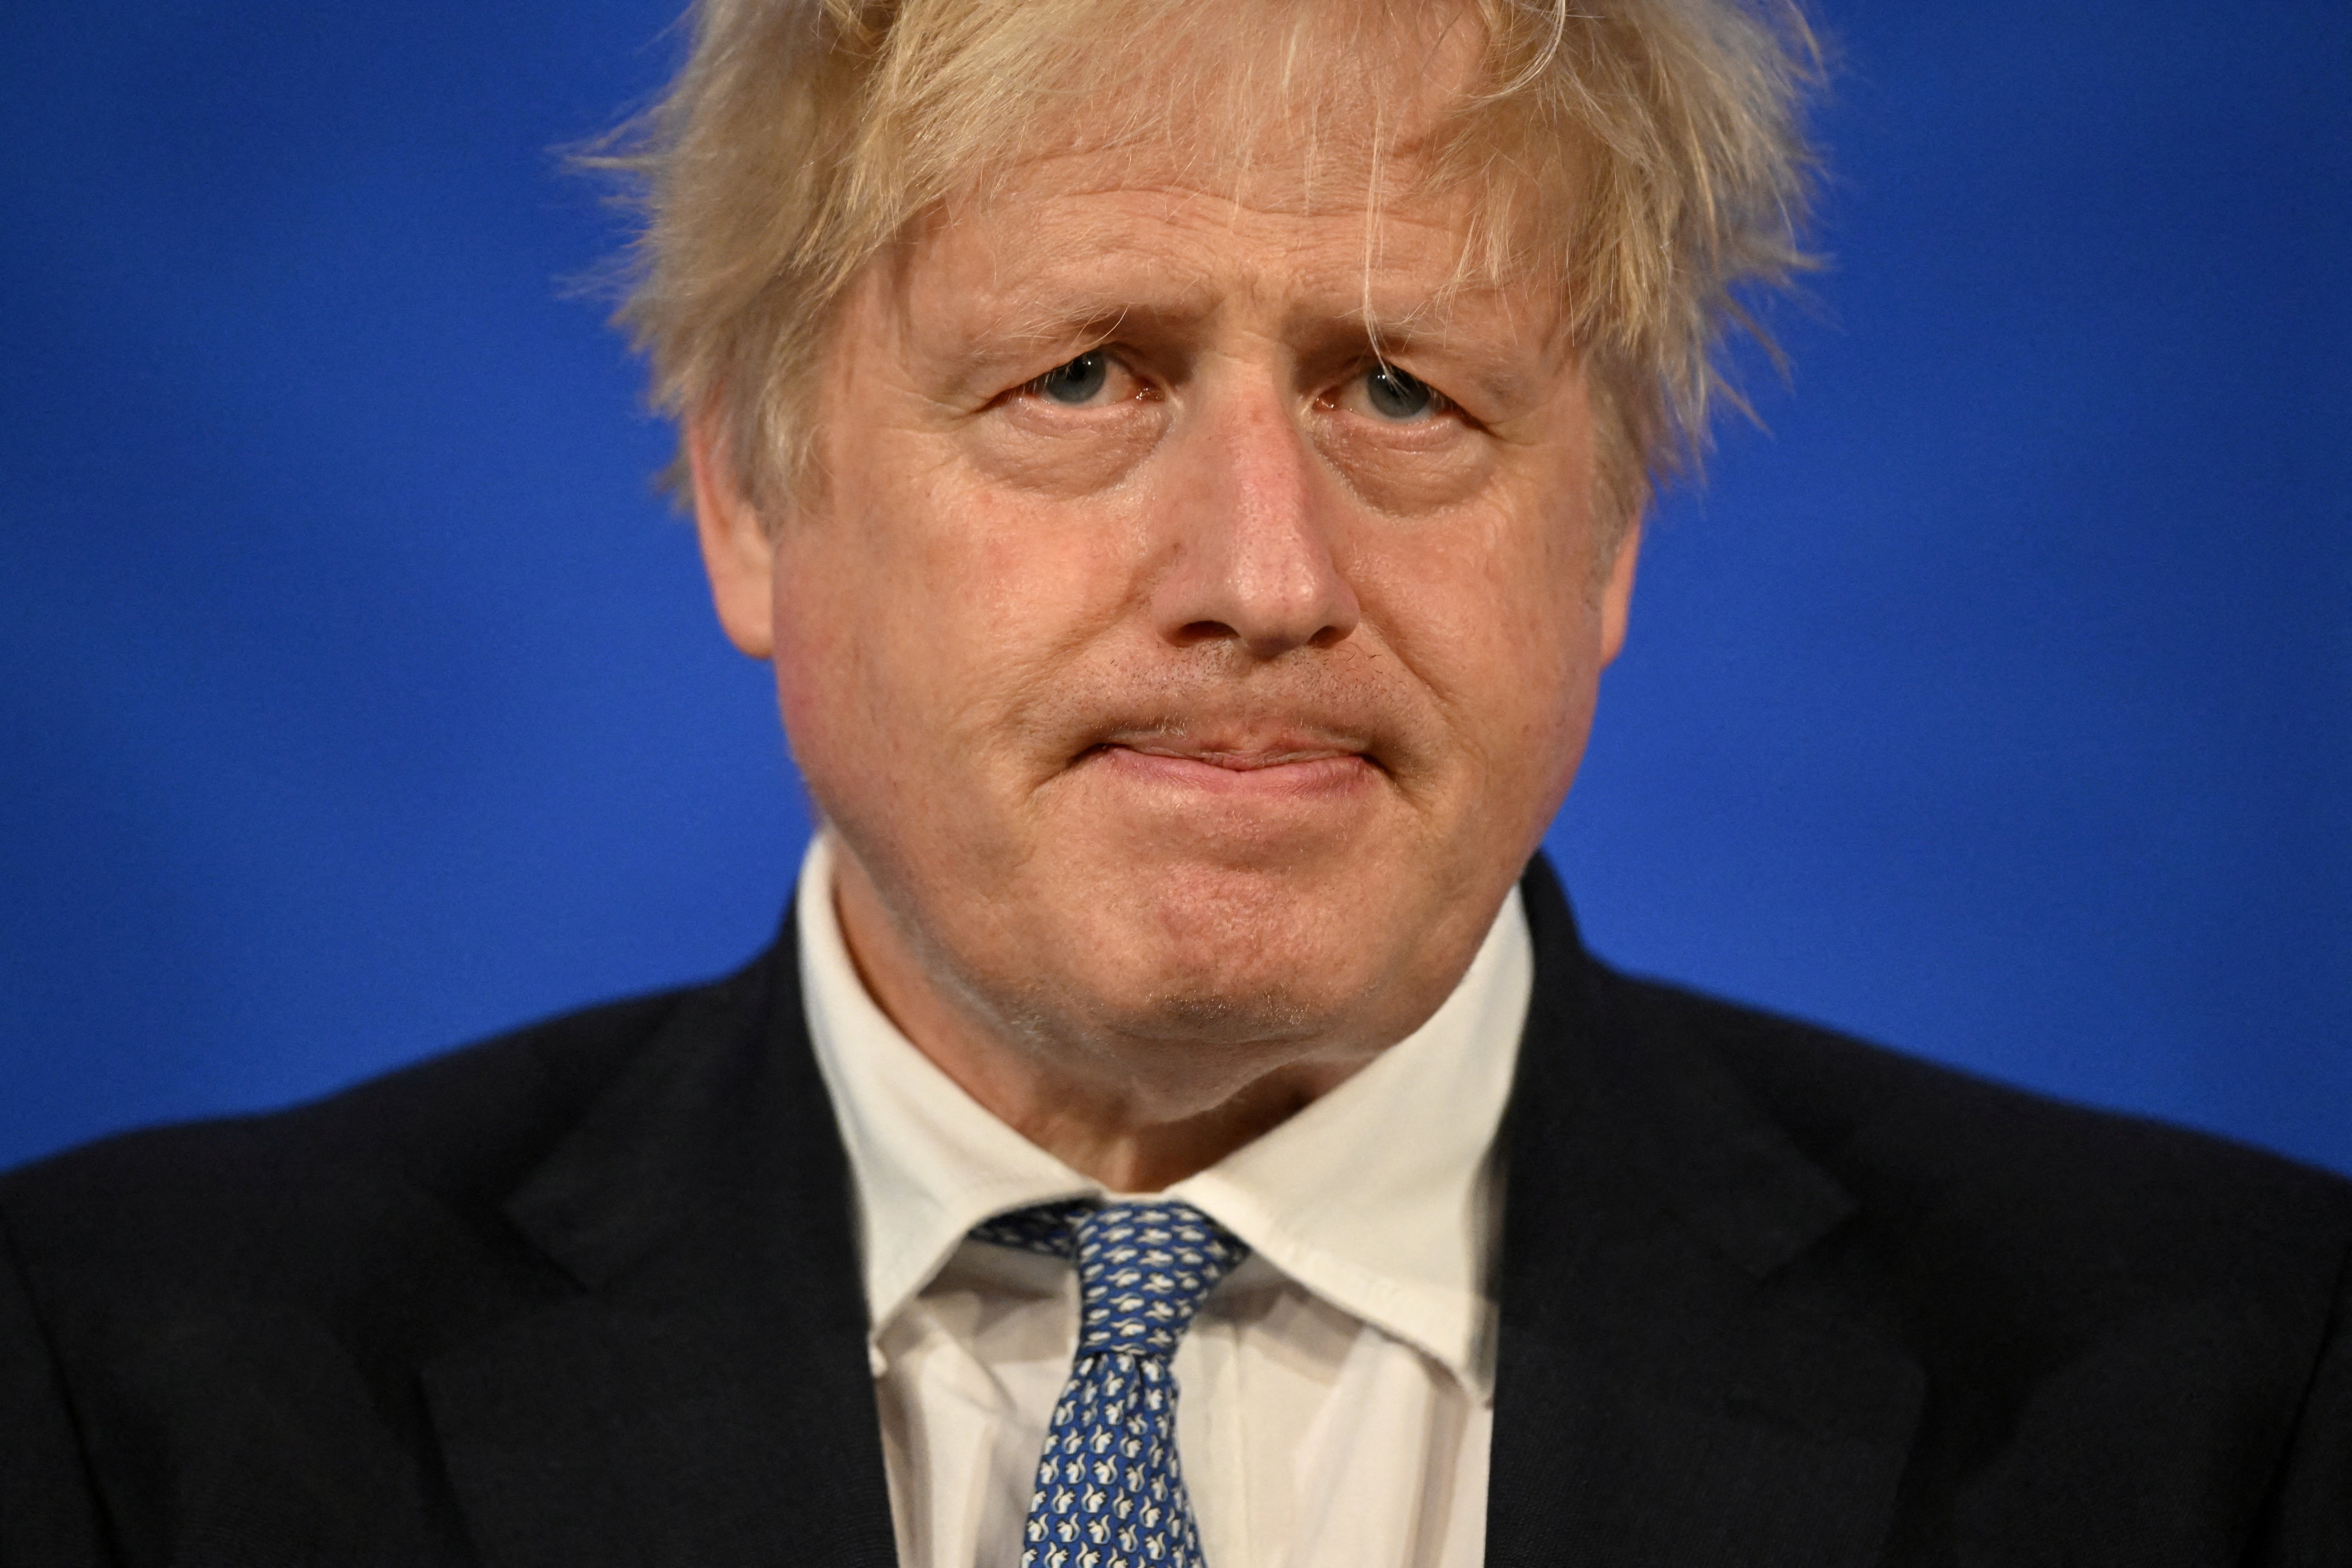 Johnson might have been a brilliant campaigner, but he struggled with the hard, messy slog and detail of governing